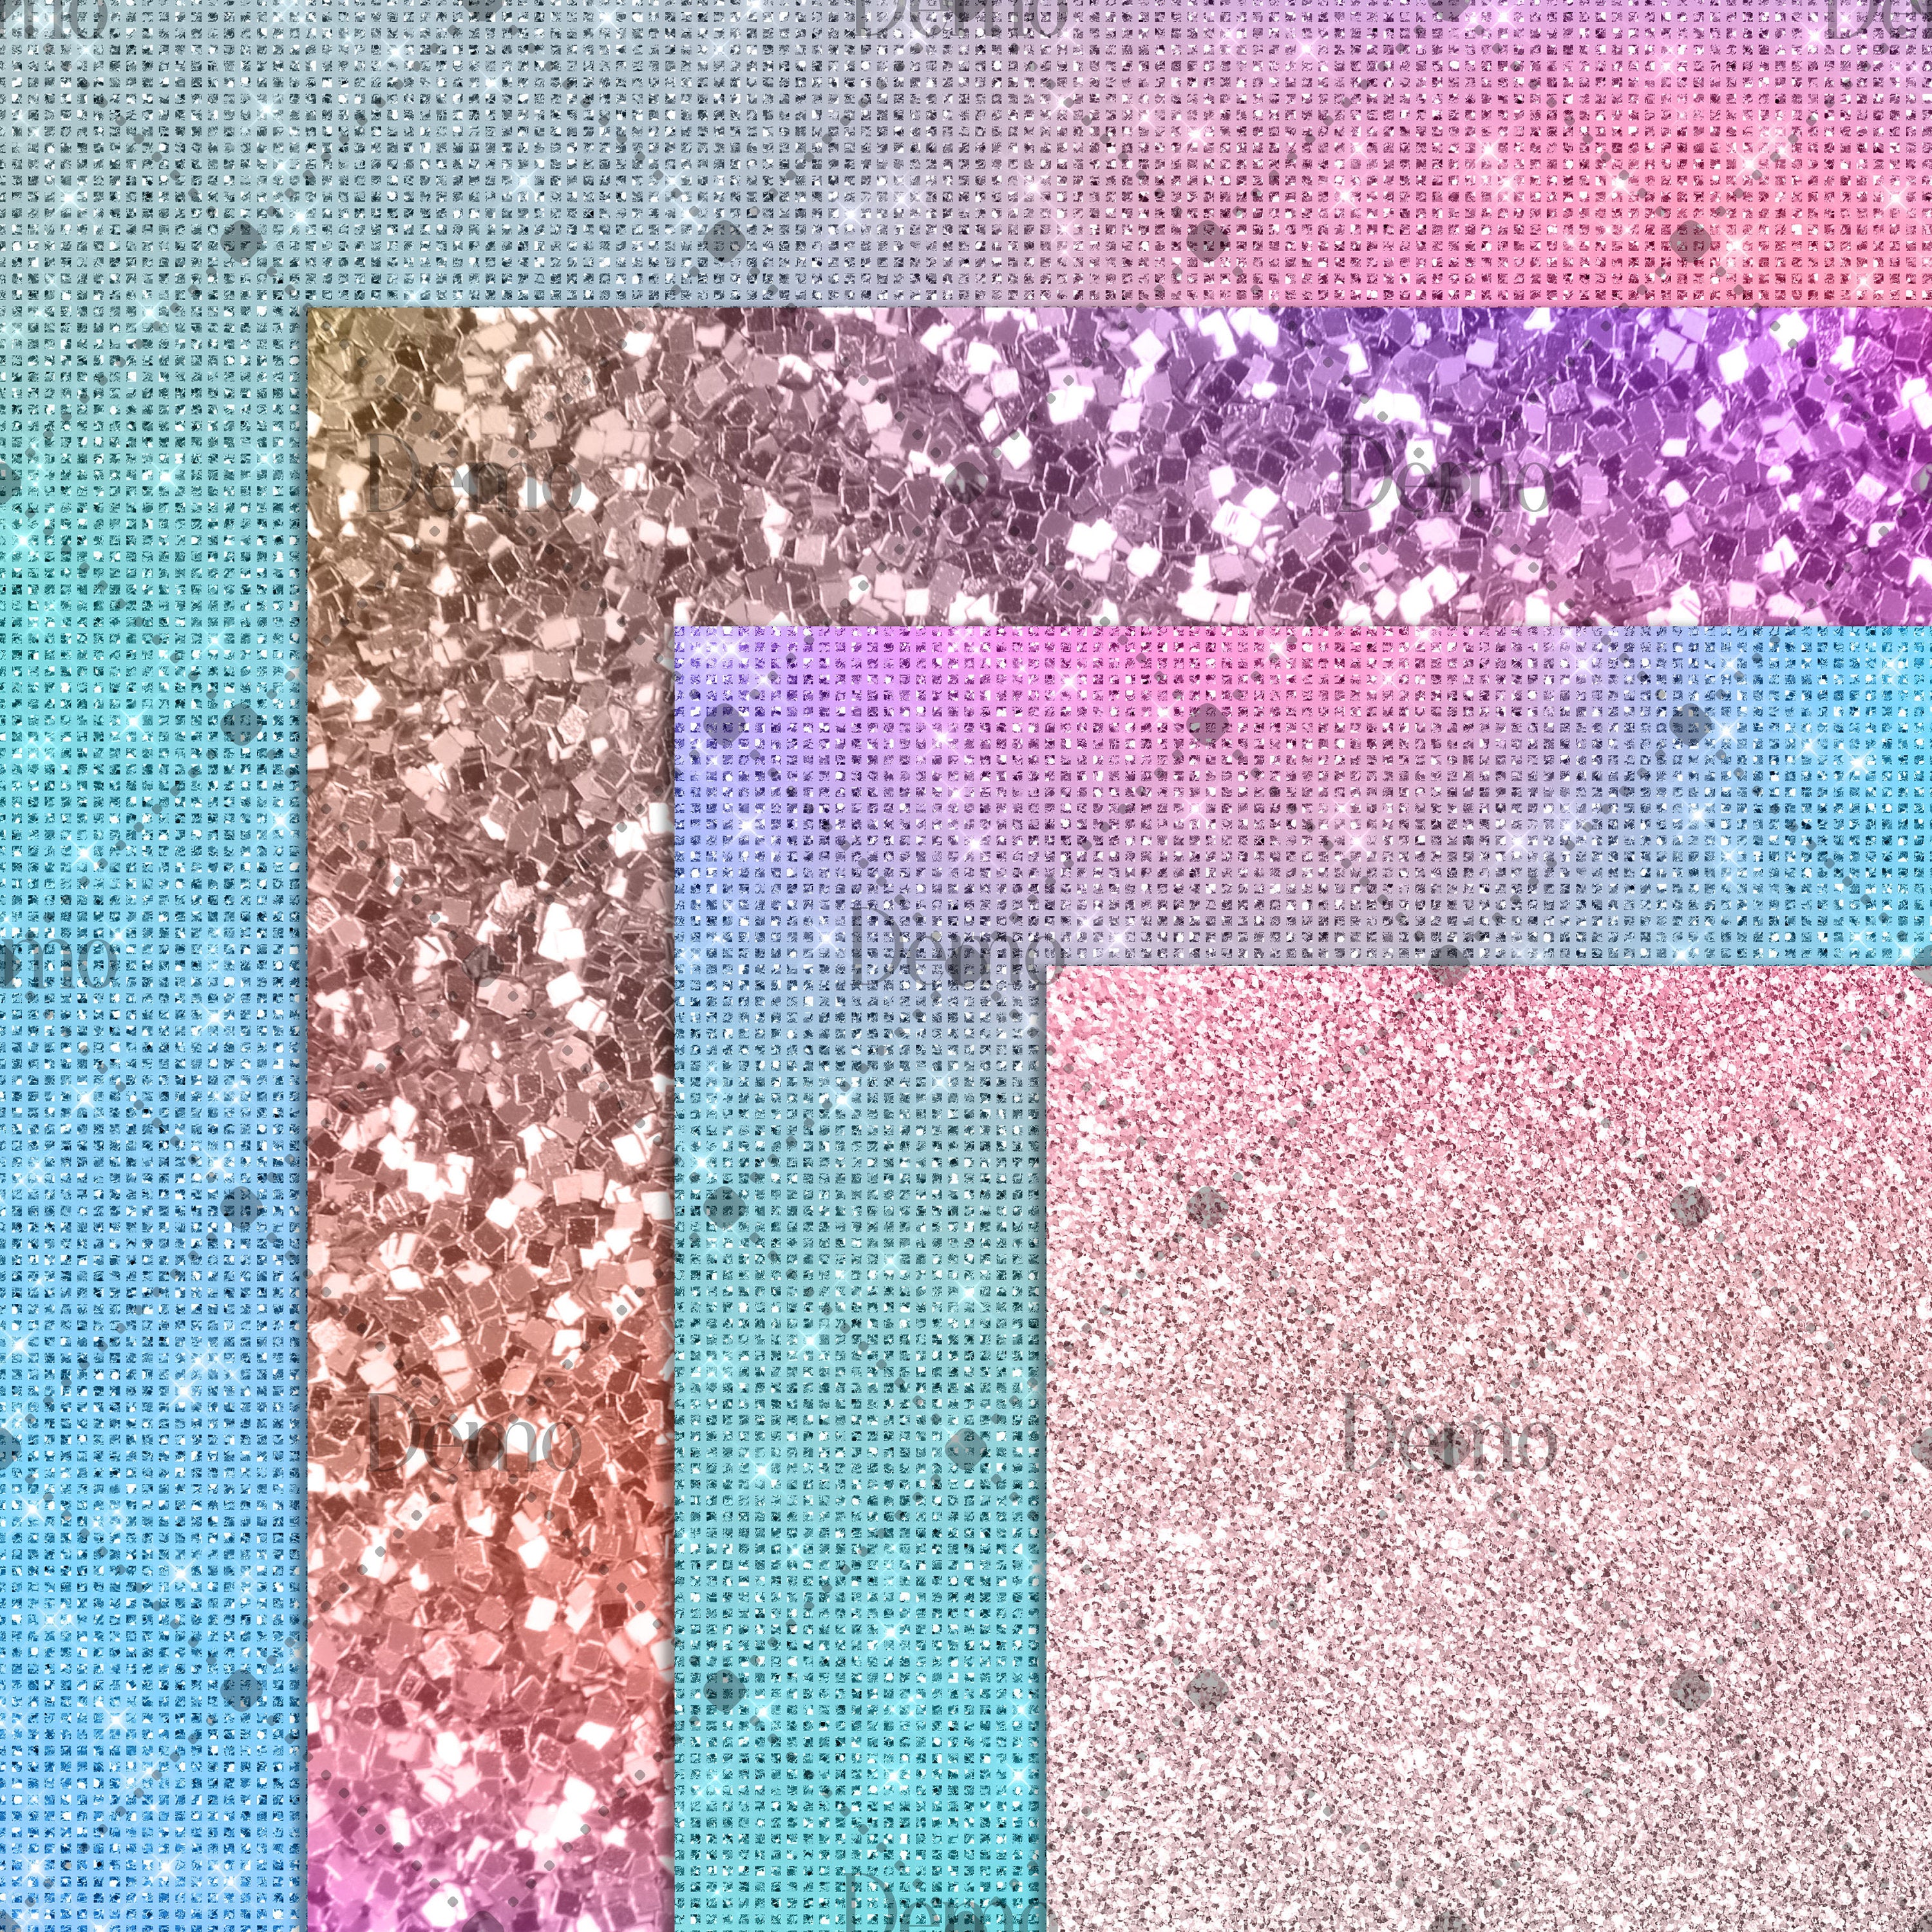 16 Magical Fairy Tale Unicorn Mermaid Glitter digital papers commercial use,distressed rainbow foil fairy kid paper Iridescent glitter paper